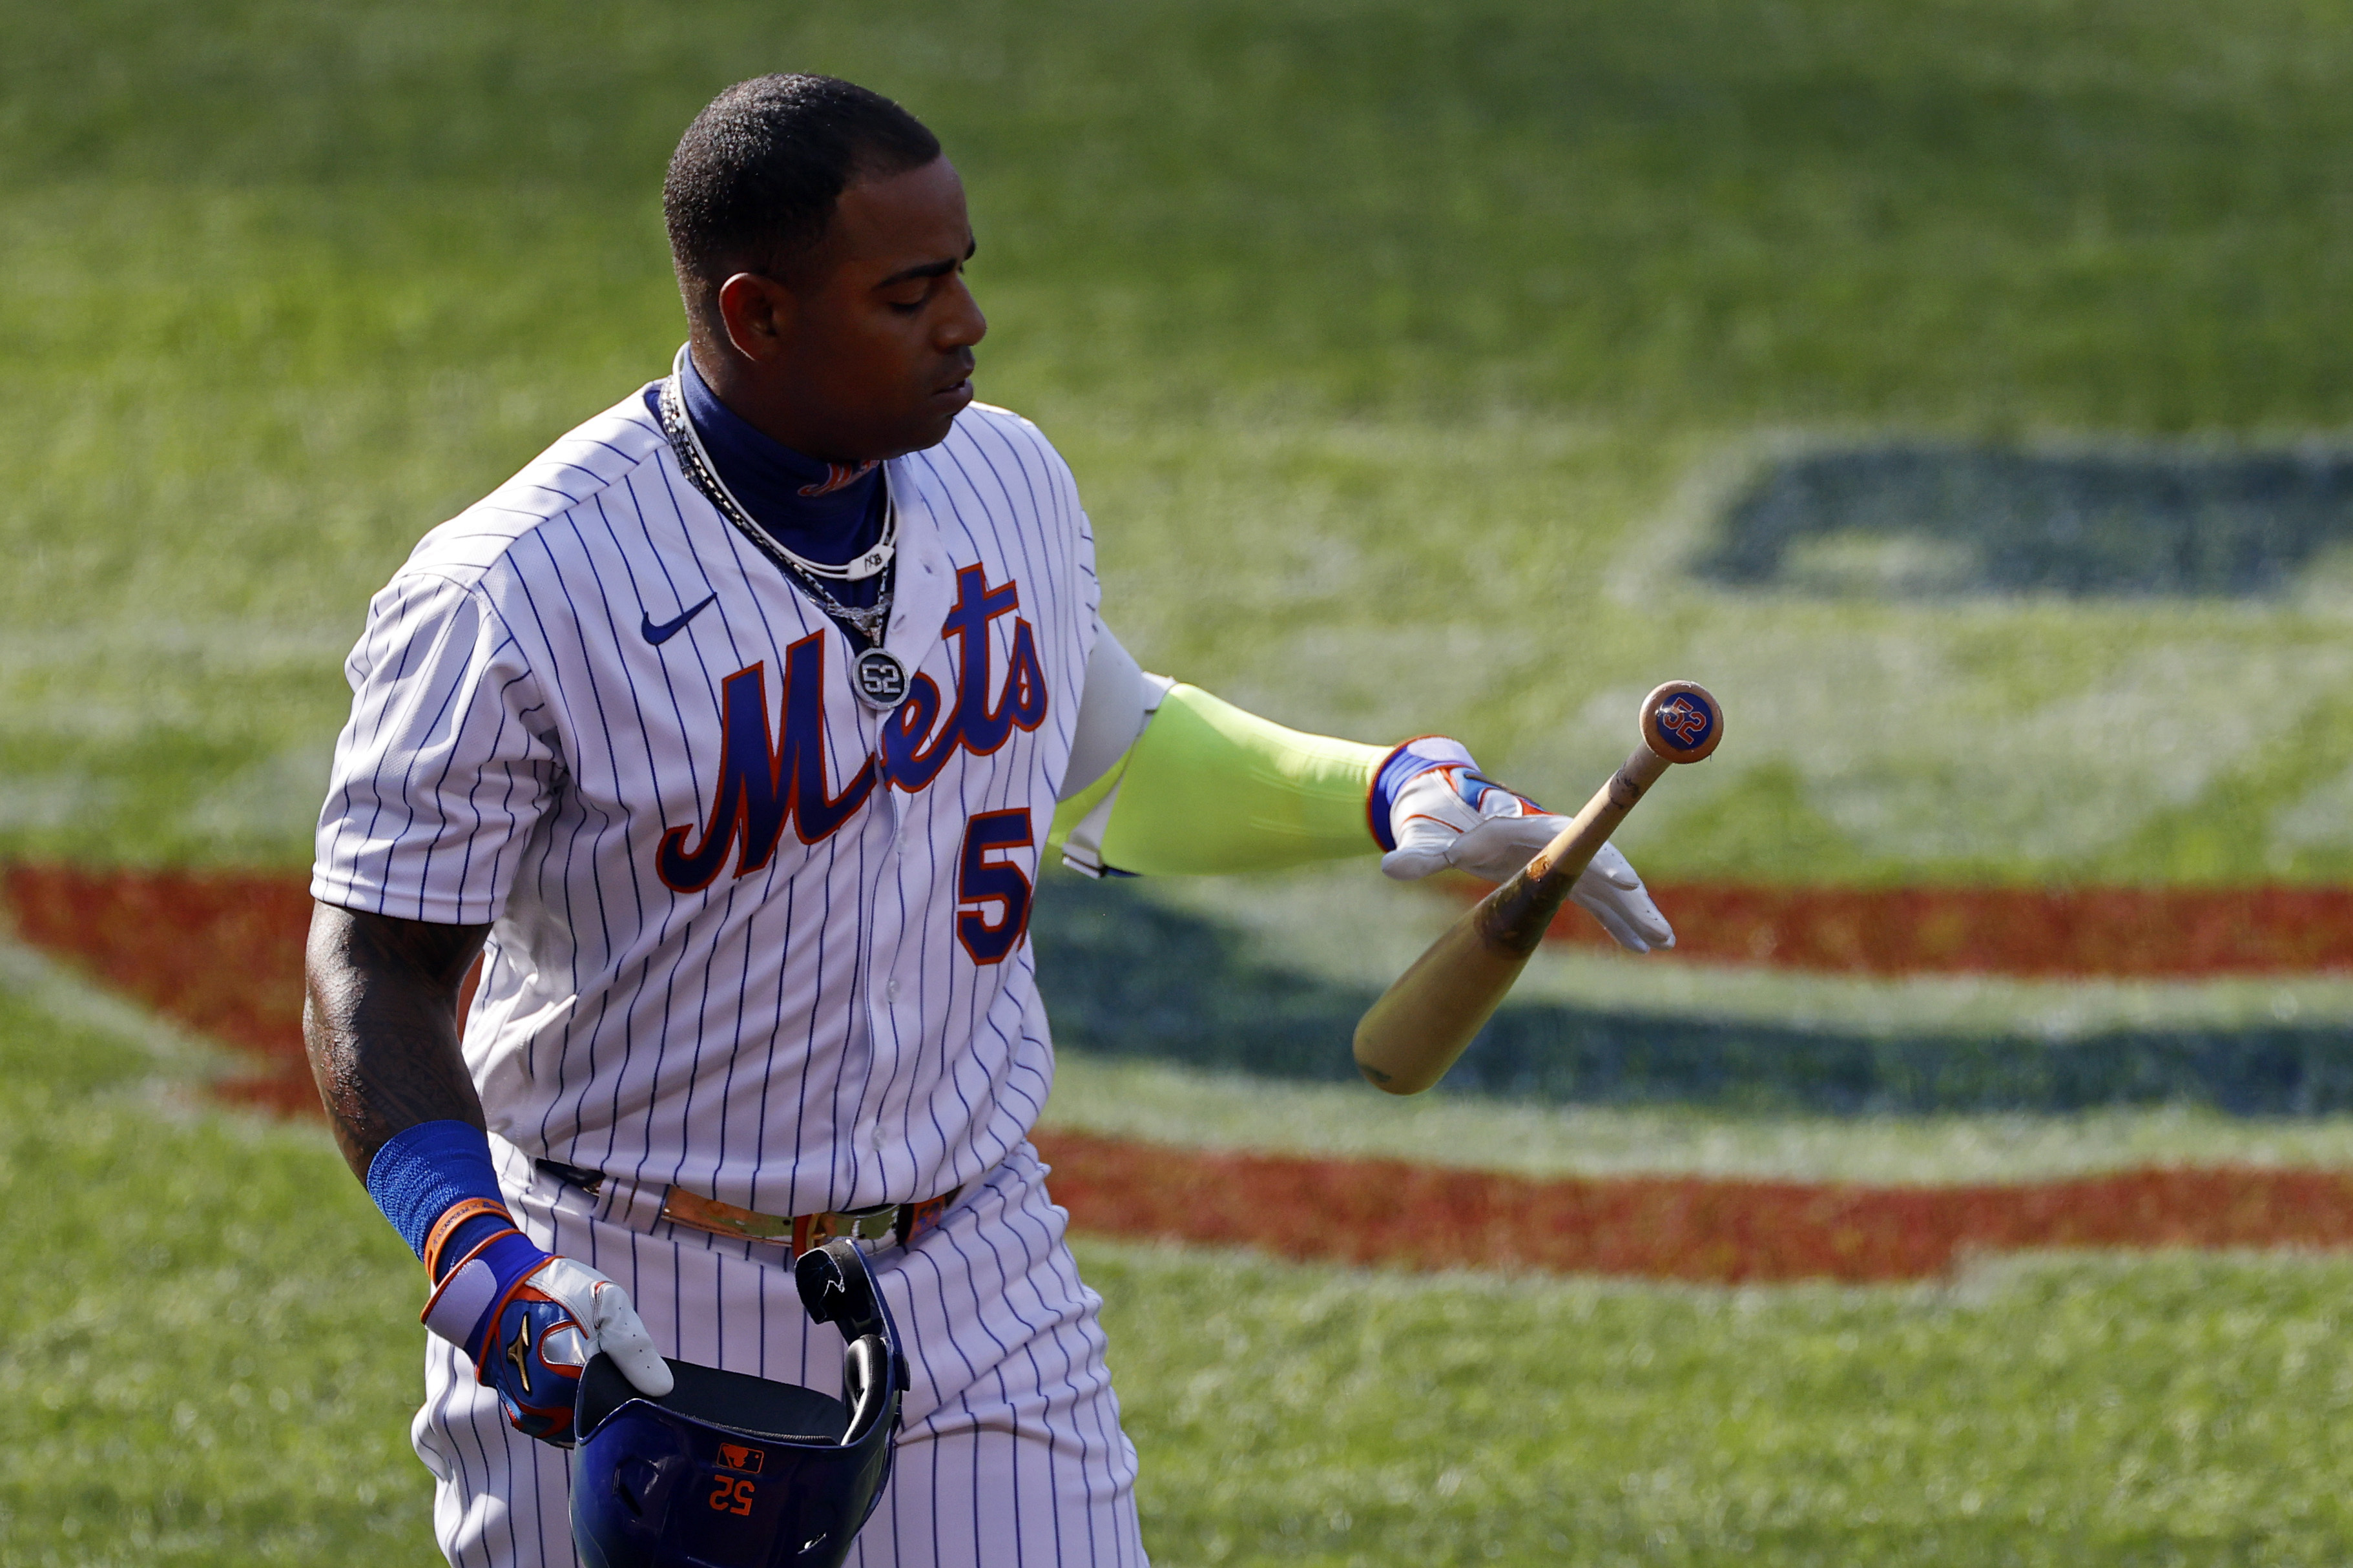 Mets star Yoenis Céspedes to opt out of 2020 season after going